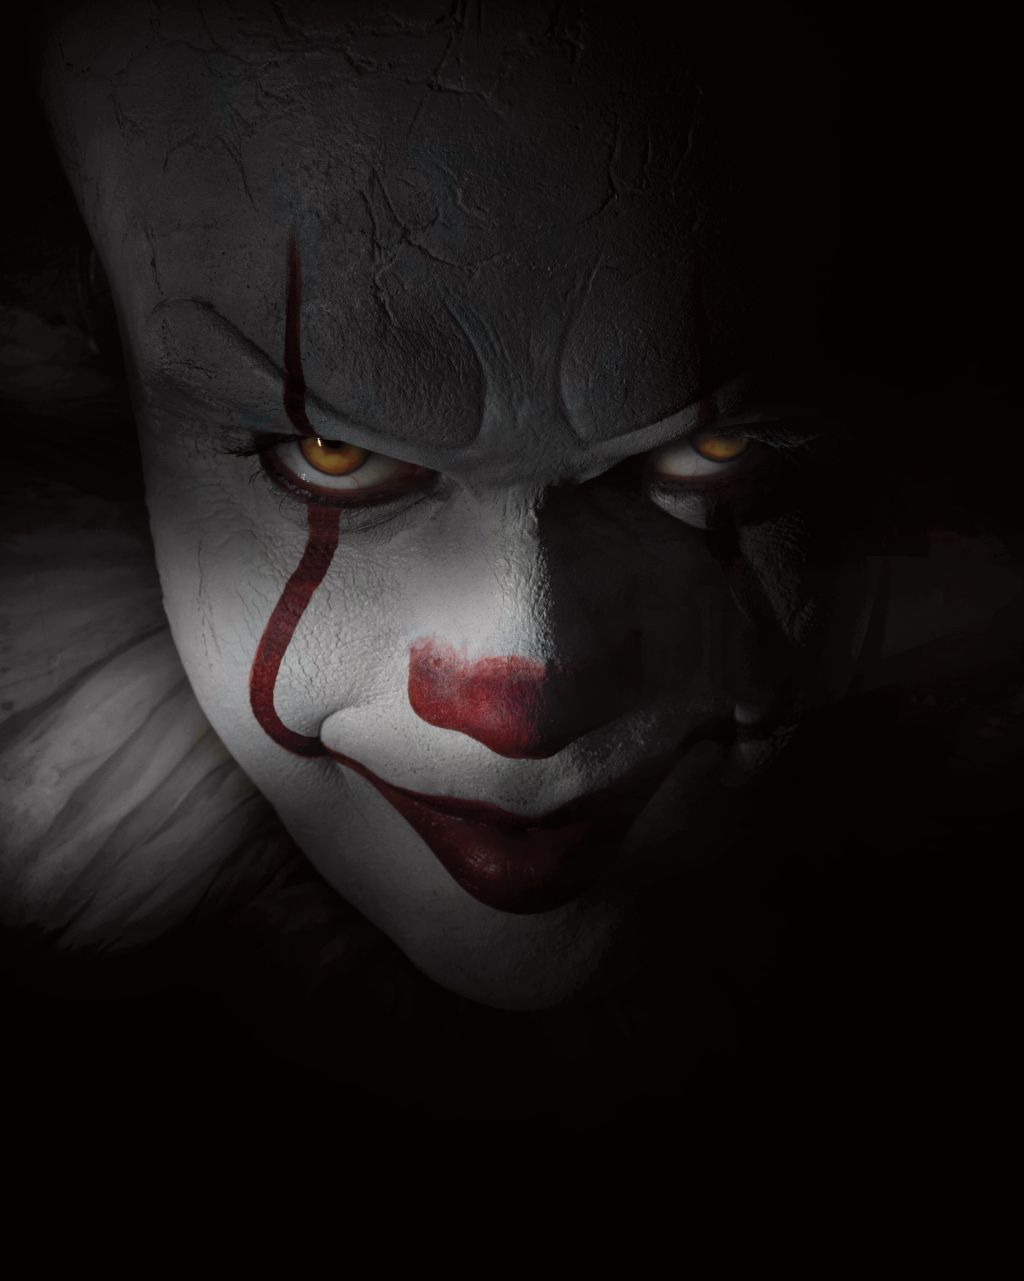 Chilling immersive screening of the new motion picture 'IT' in London